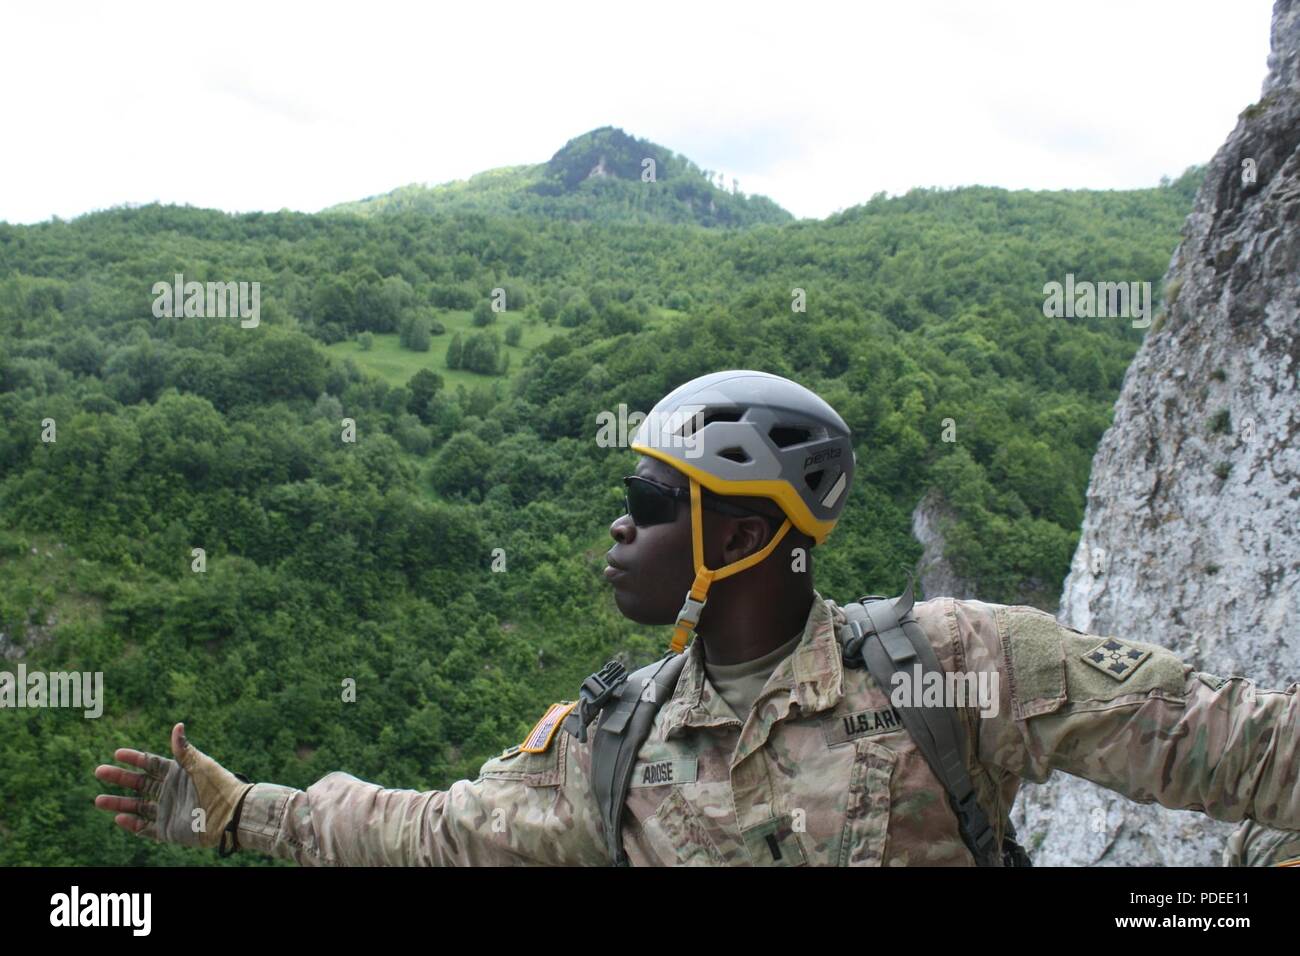 1st Lt. Kareem A. Abiose of the 3-61 CAV takes in the view of his surroundings on Via Ferrata Berim mountain May 19 in Kosovo. This was his first time rock climbing. Stock Photo